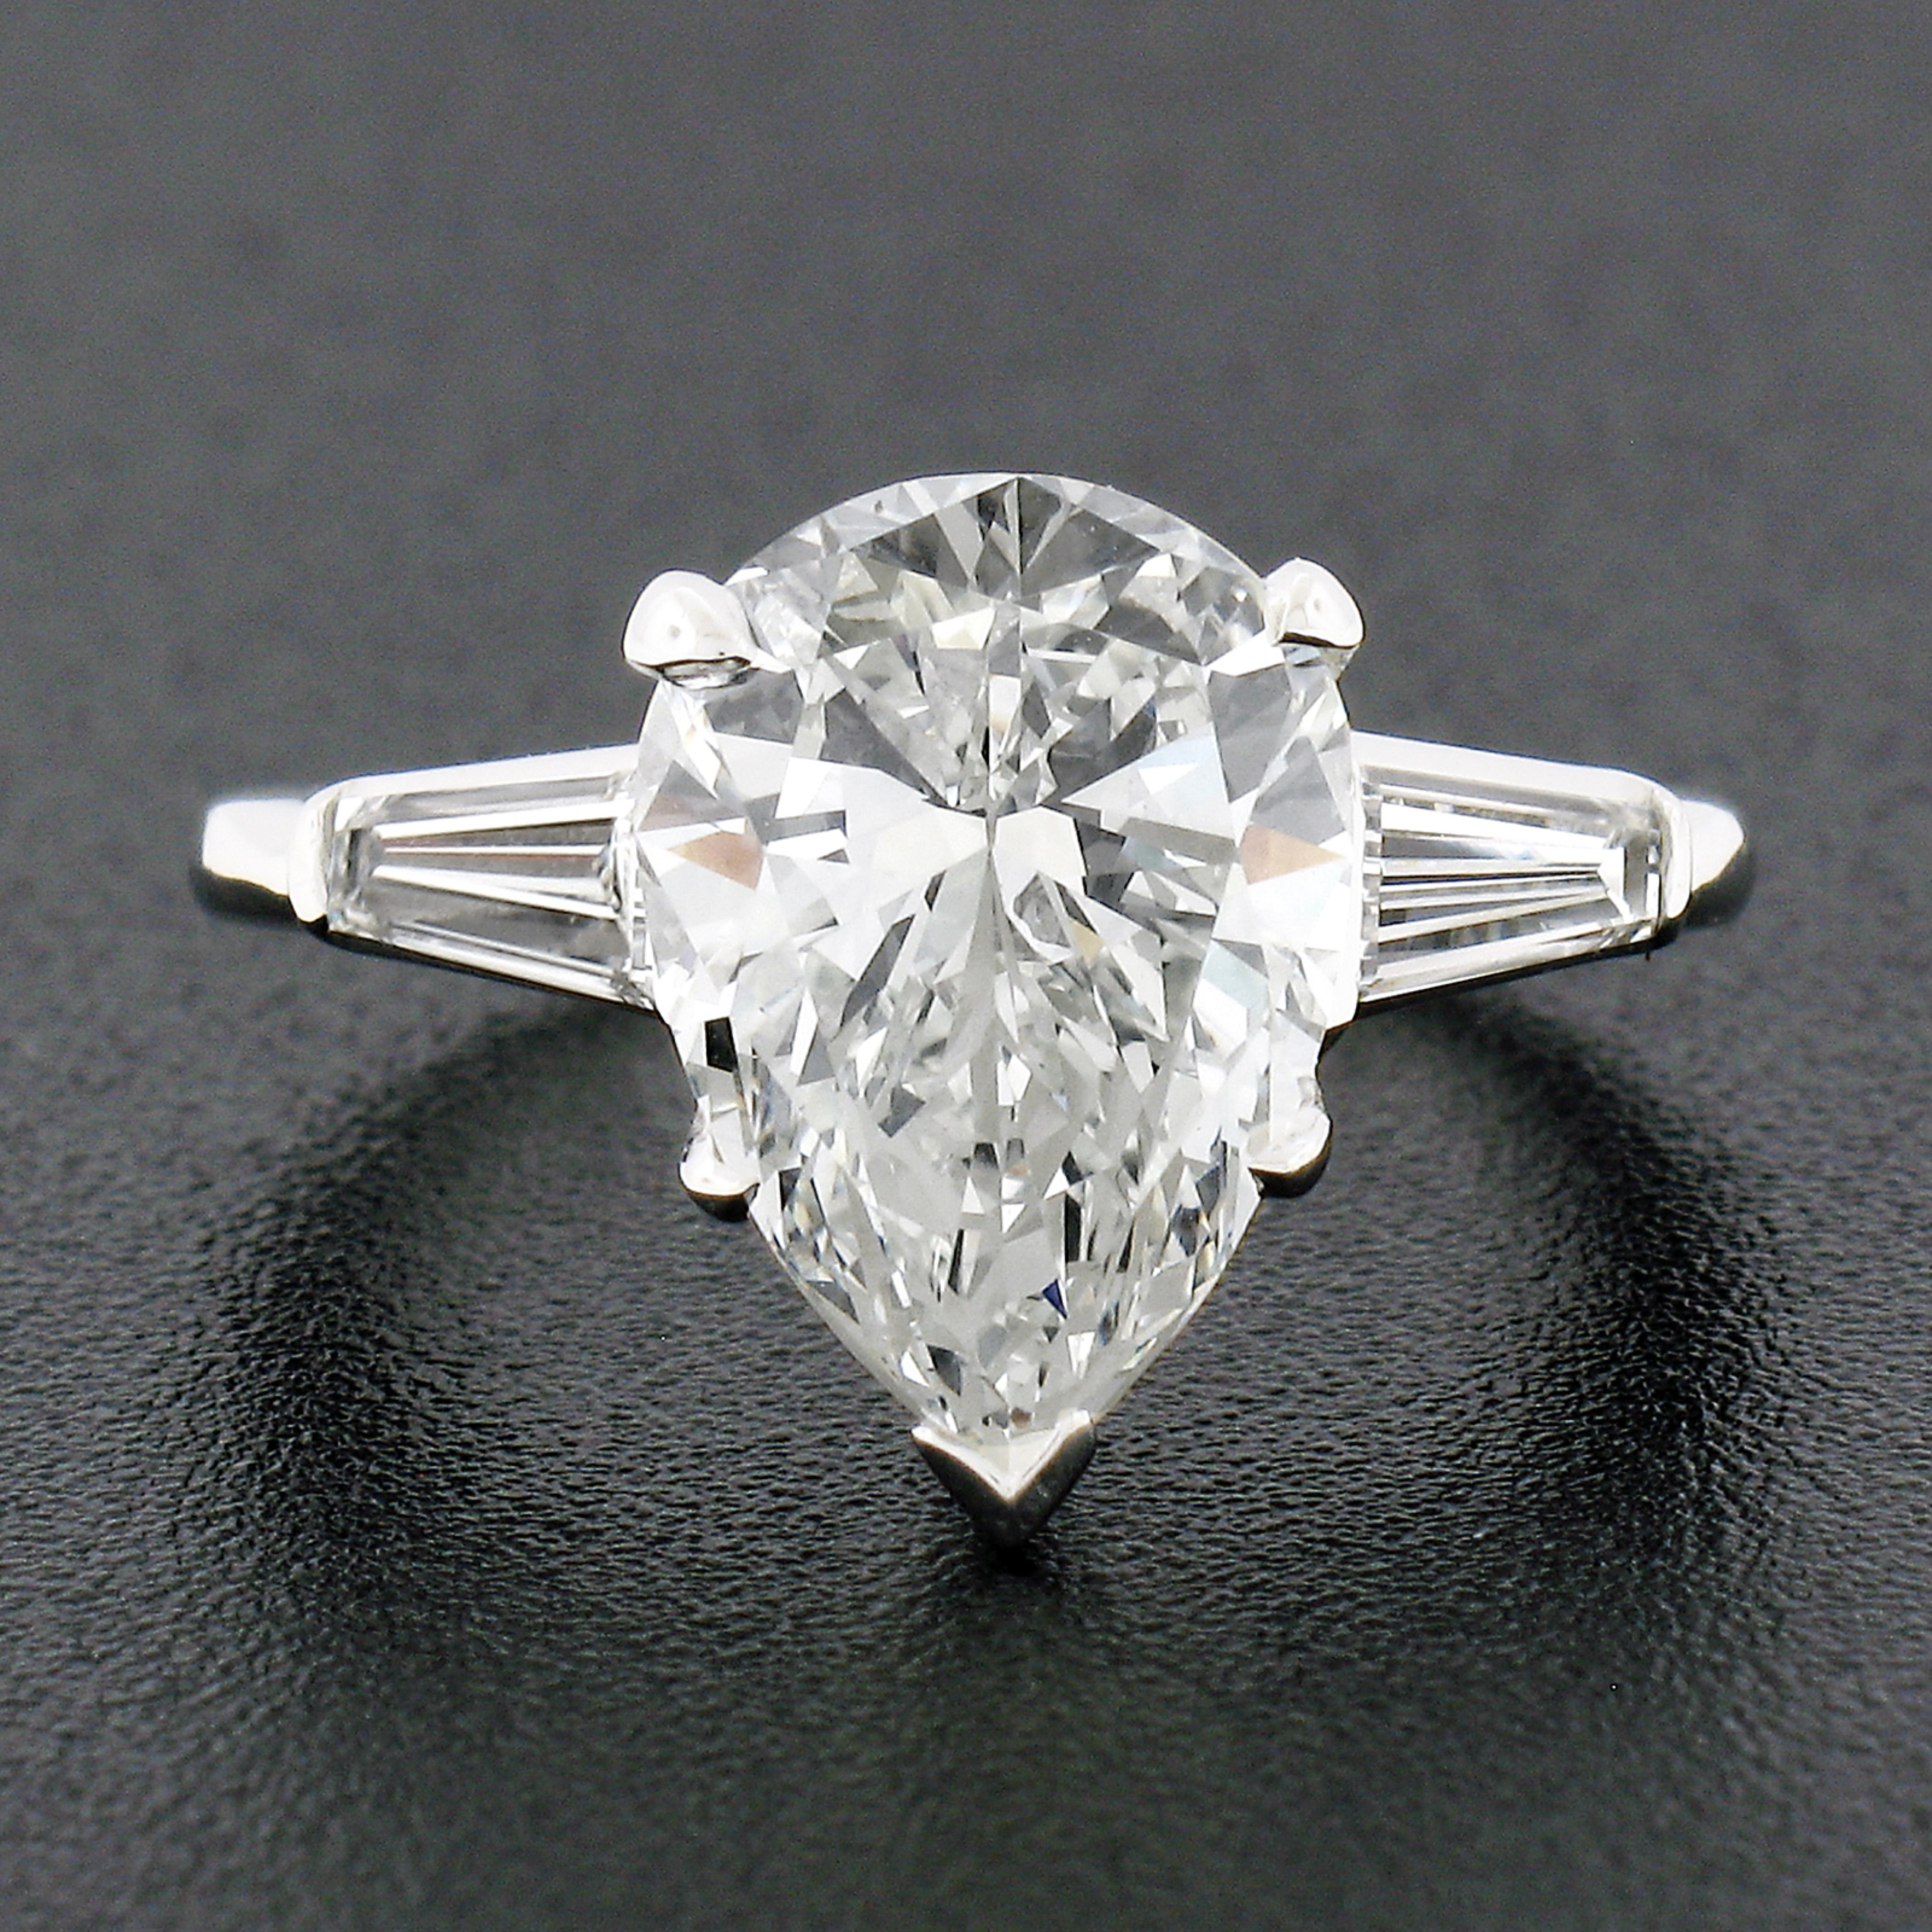 This dramatic diamond engagement ring is very well crafted in a solid platinum classic setting that carries a stunning, GIA certified, pear brilliant cut diamond at its center. This gorgeous diamond is certified by GIA as weighing 3.02 carats and